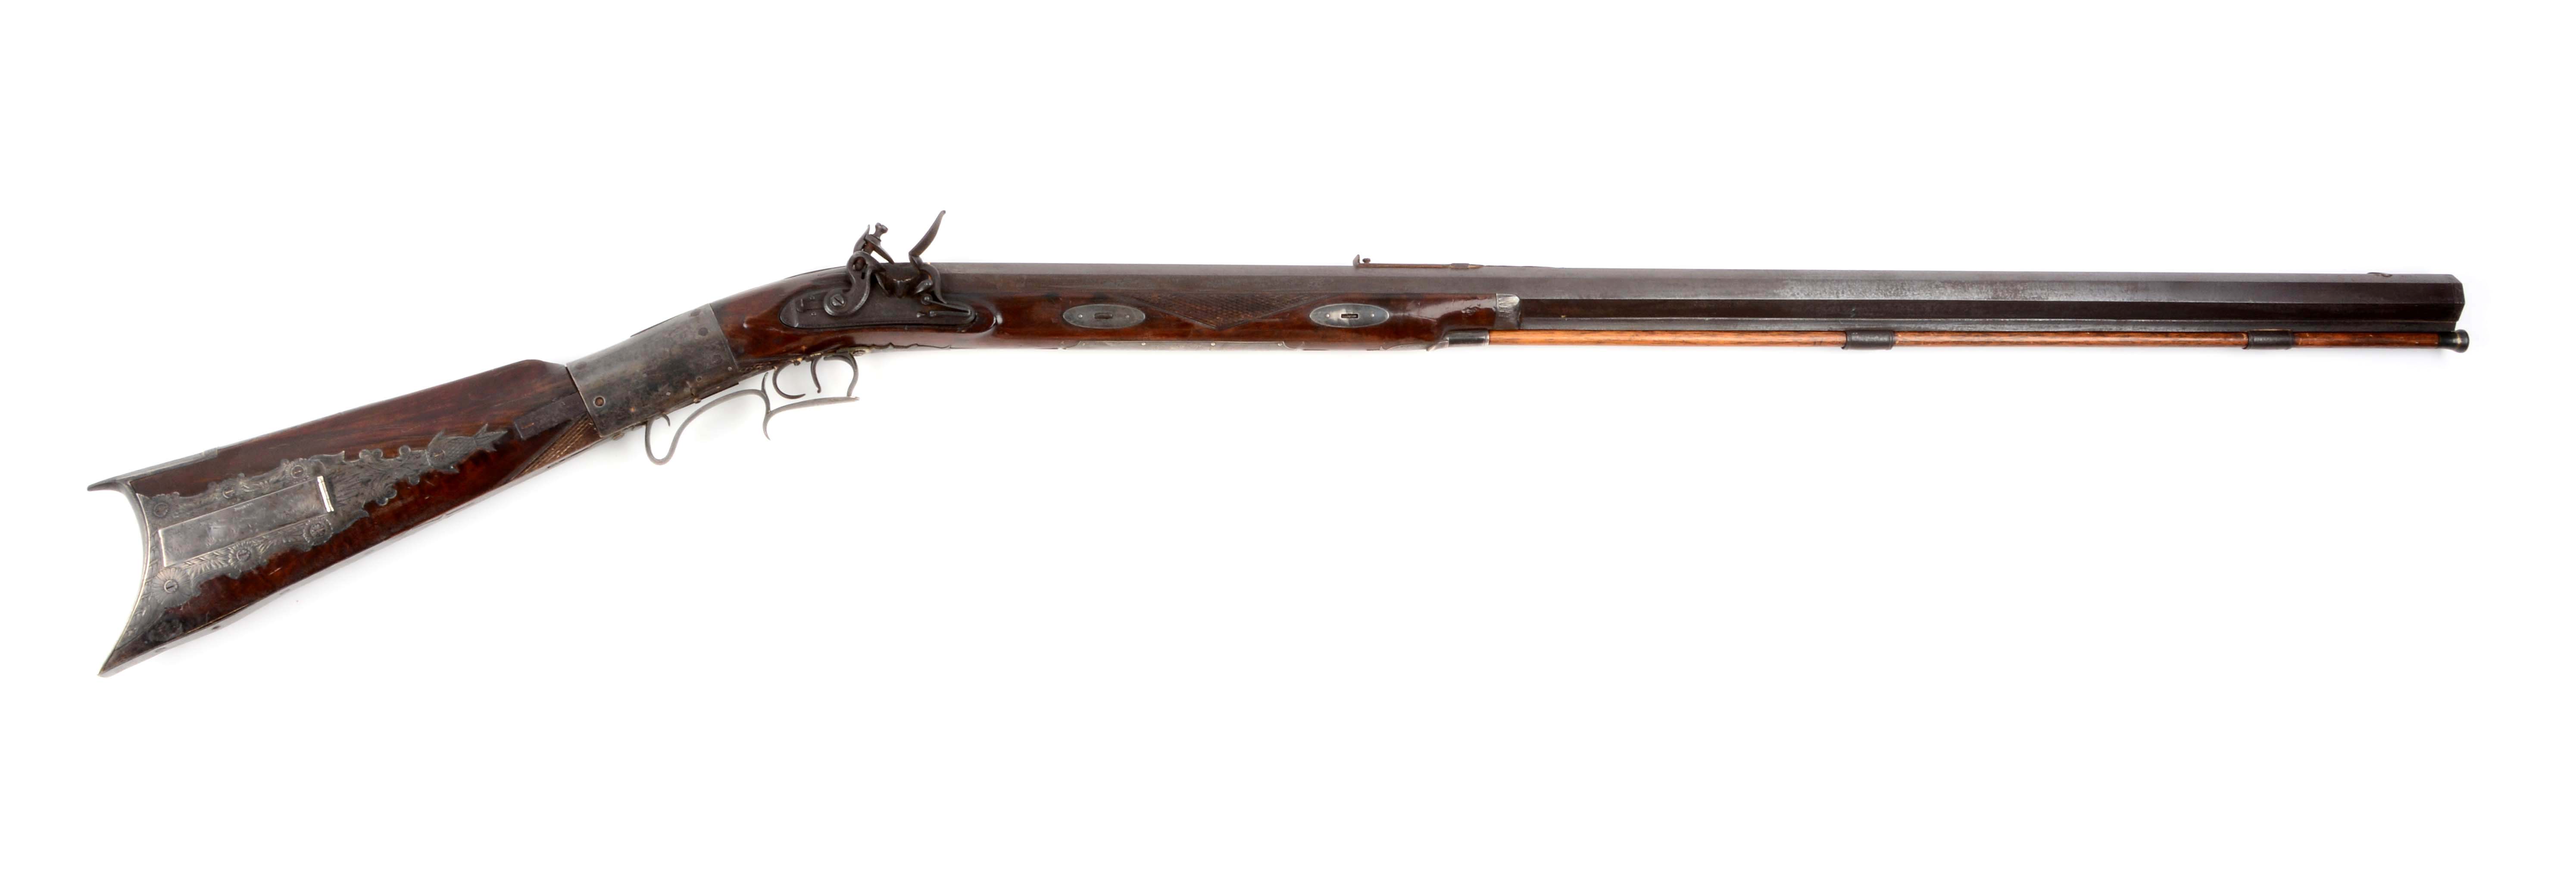 R. Bowie's Silver-Mounted Flintlock Rifle, estimated at $40,000-70,000.